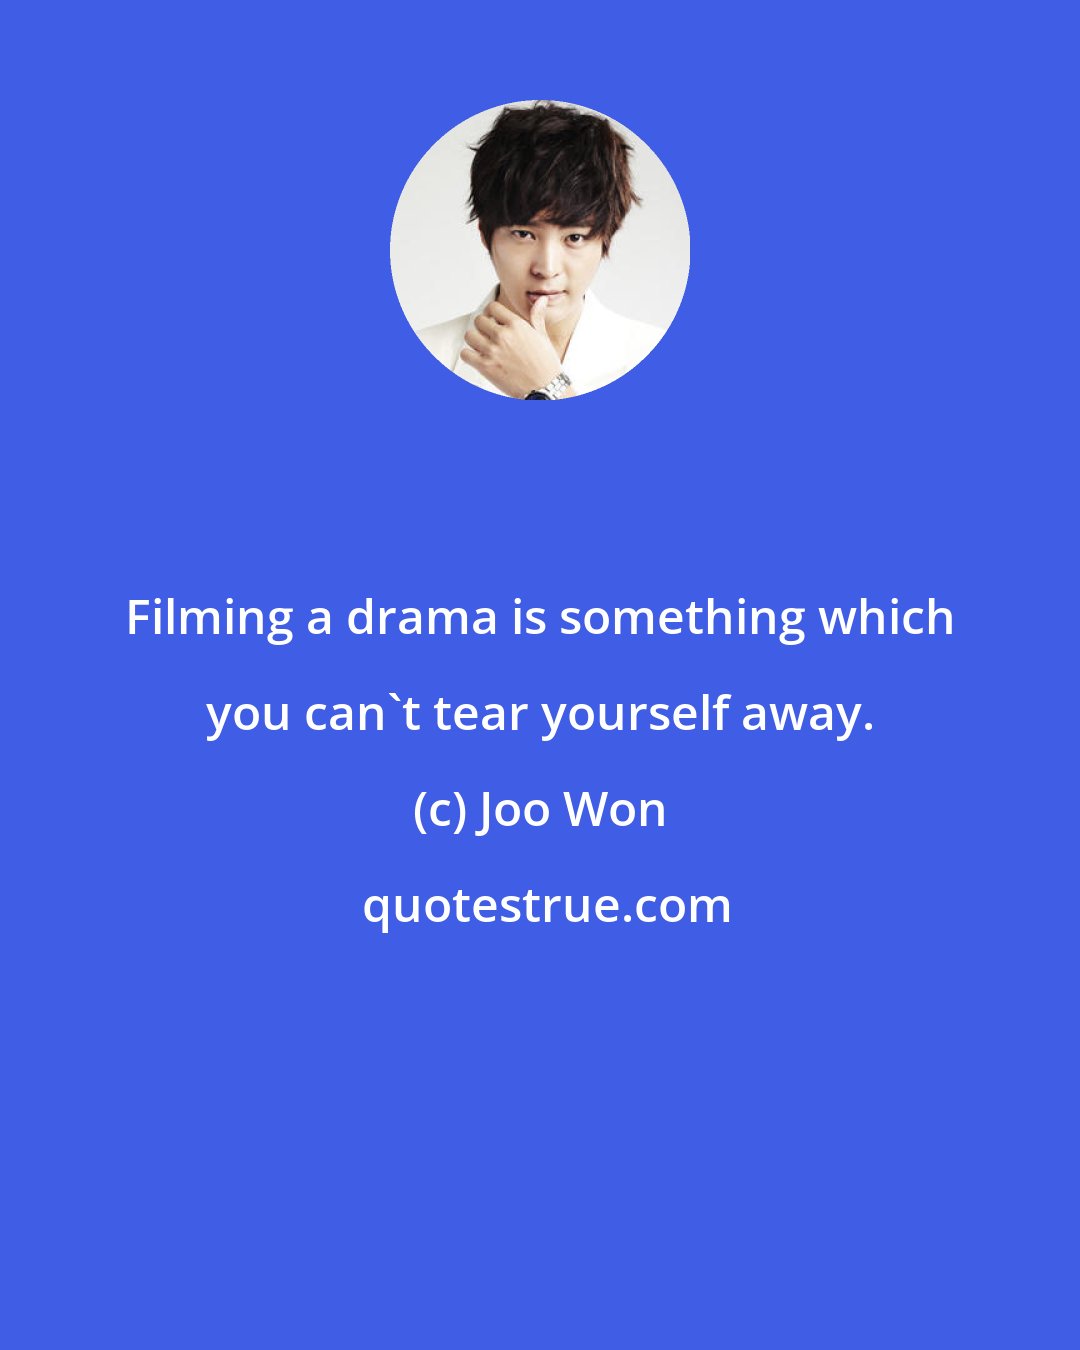 Joo Won: Filming a drama is something which you can't tear yourself away.